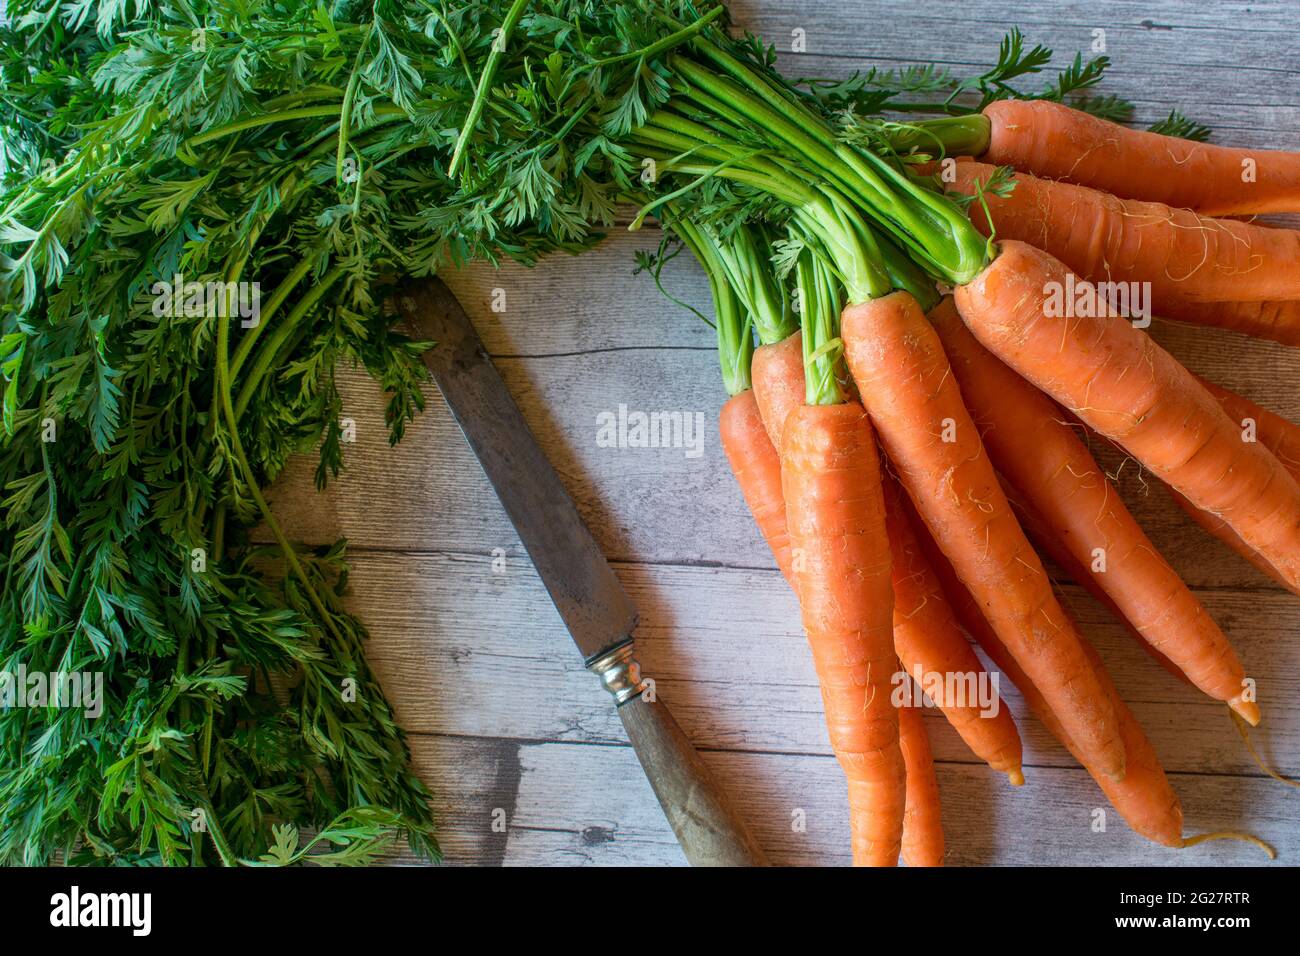 A bundle of fresh carrots with greens on wooden background Stock Photo